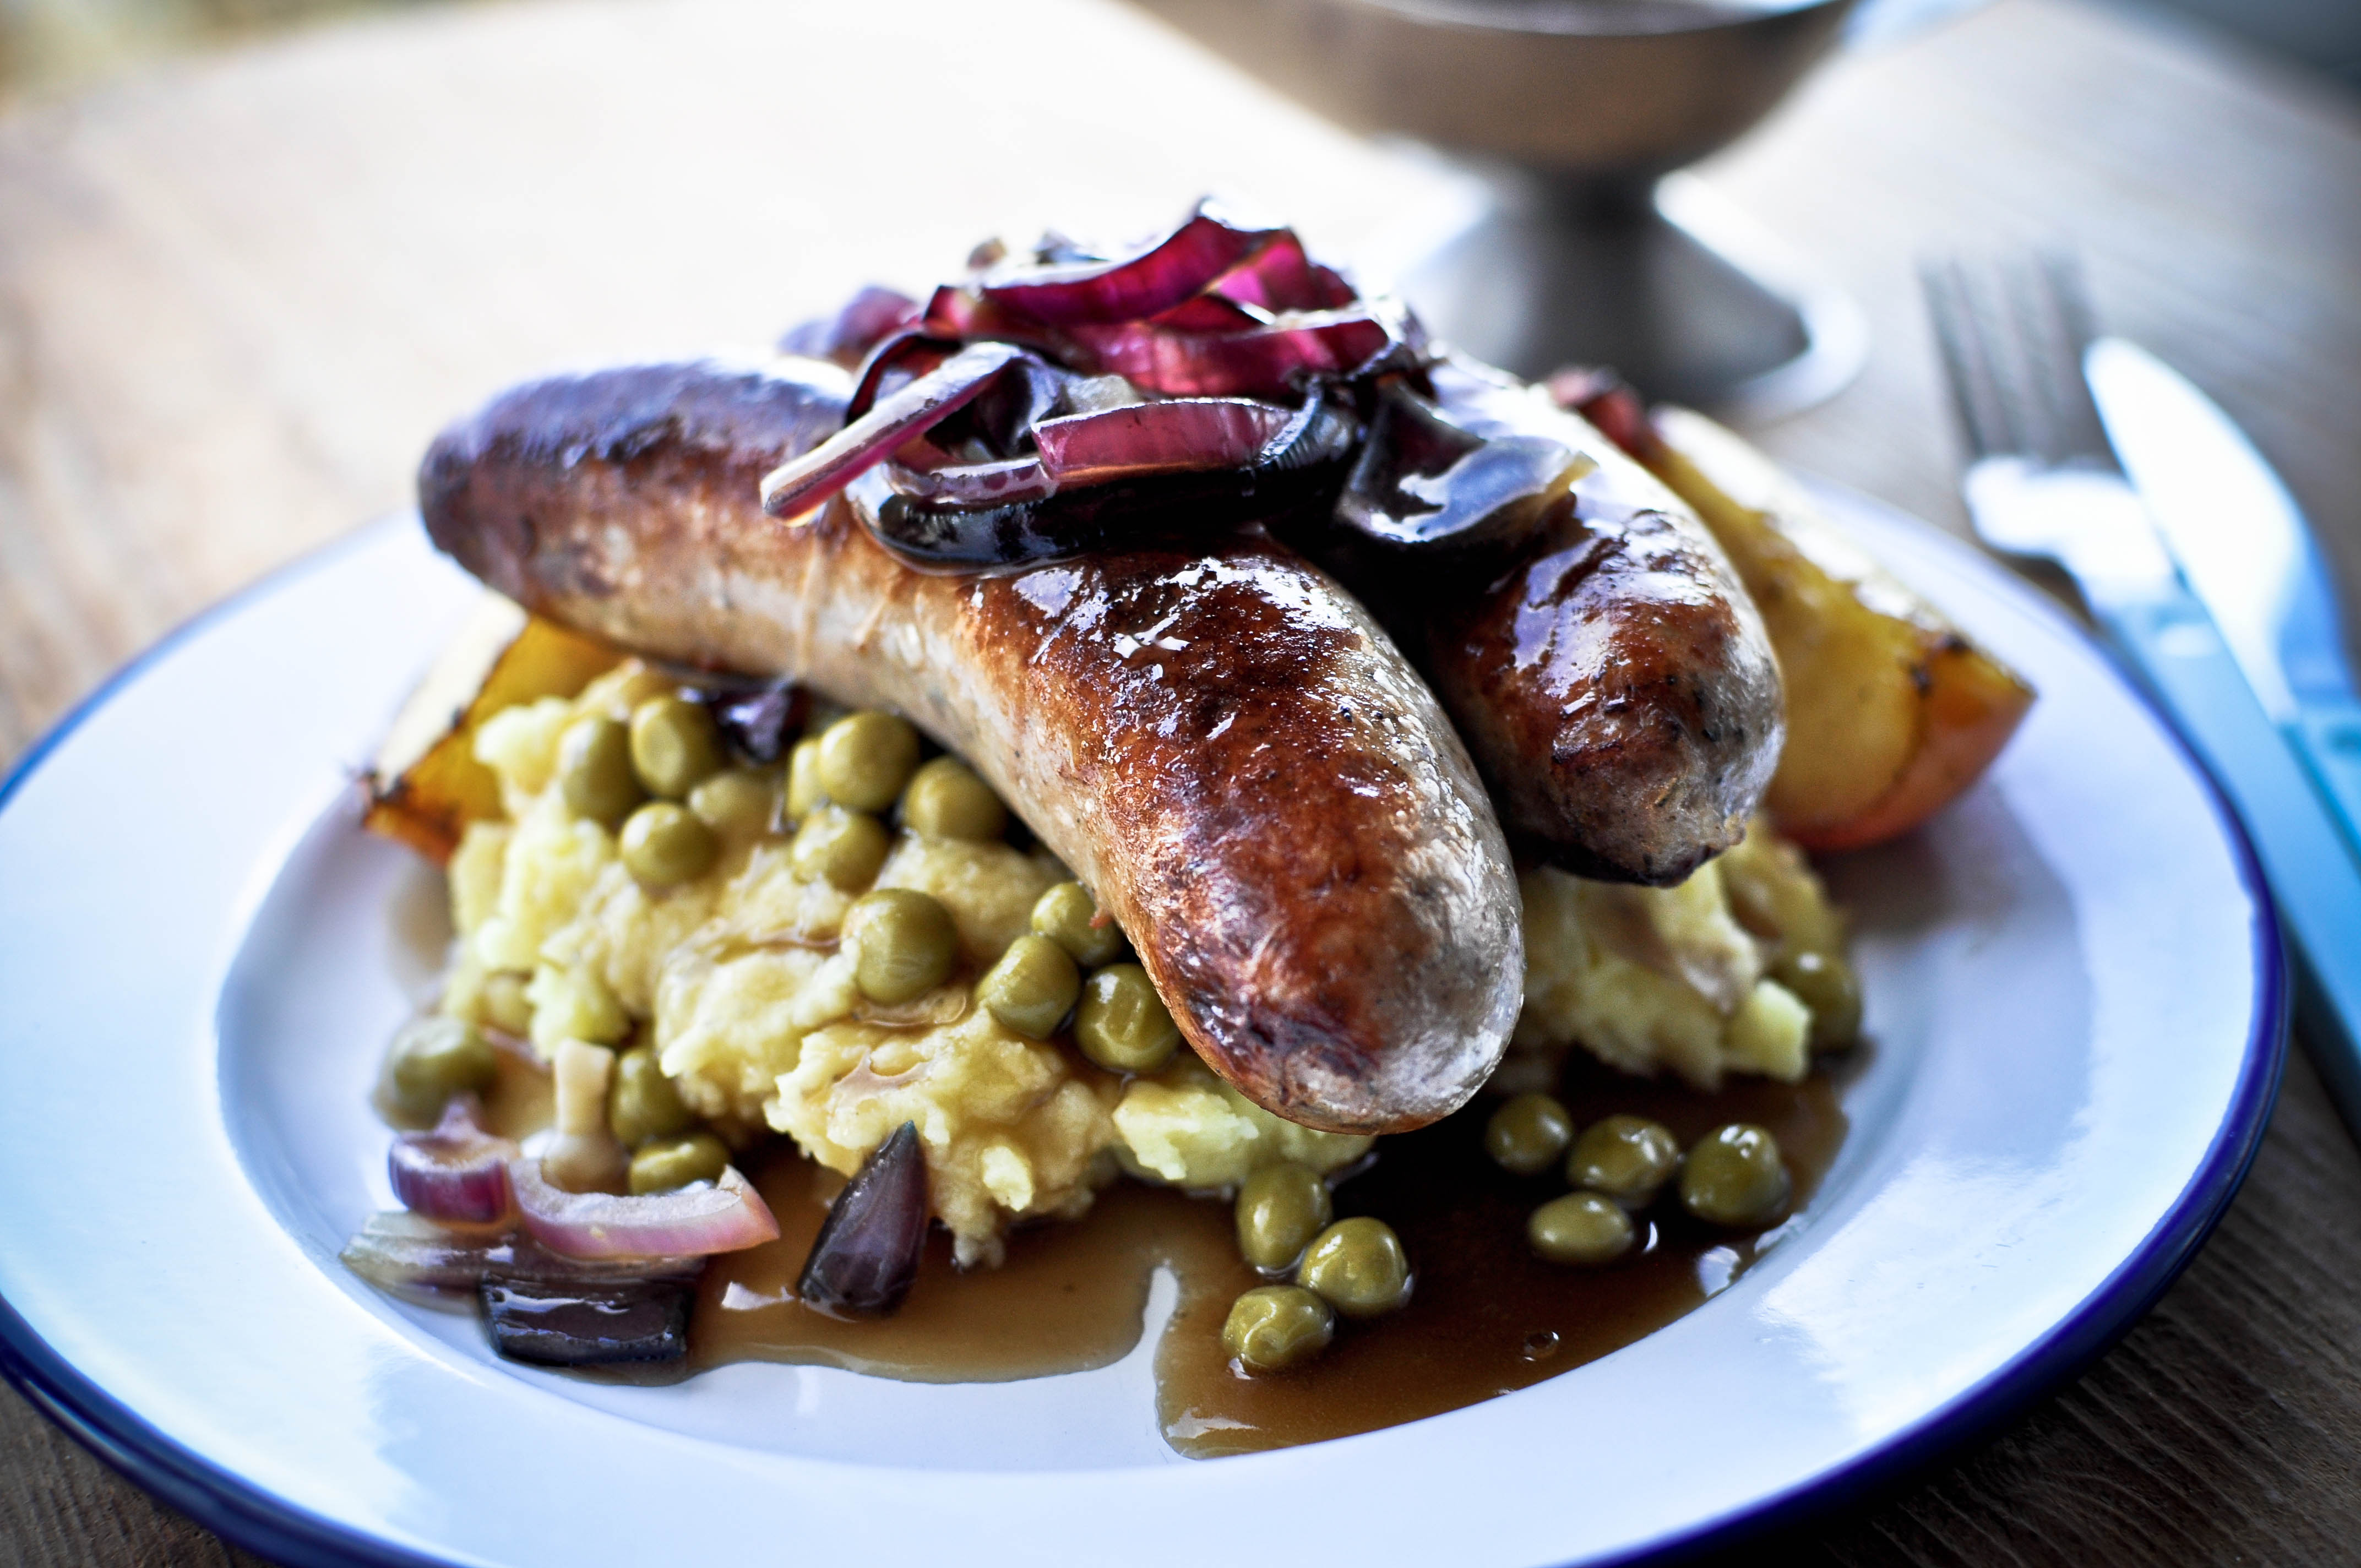 Bangers_lunch_wide2 (1 of 1).jpg